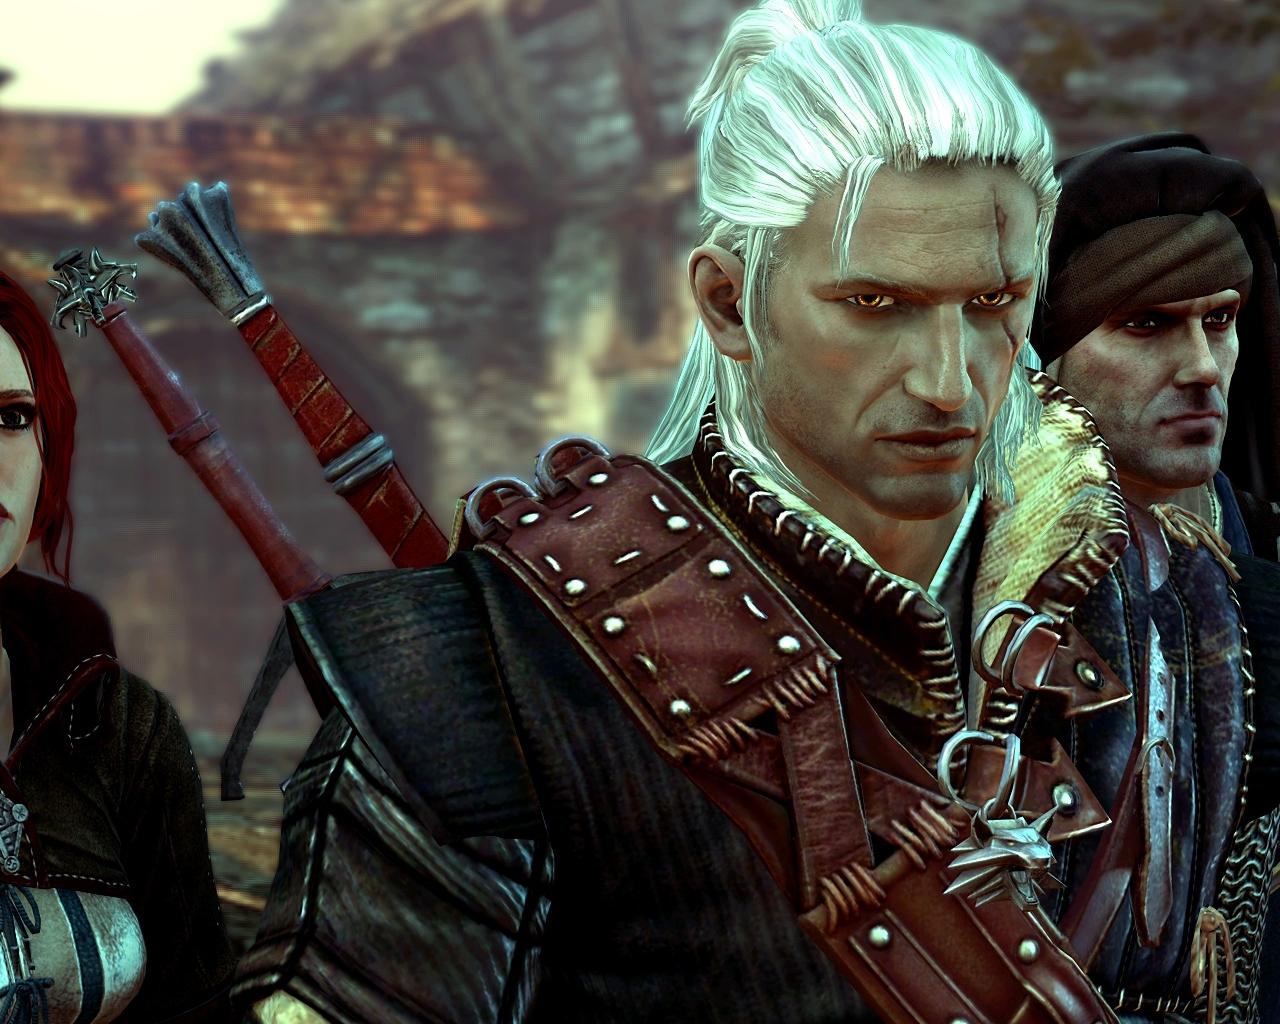 Image The Witcher The Witcher 2: Assassins of Kings Geralt of Rivia